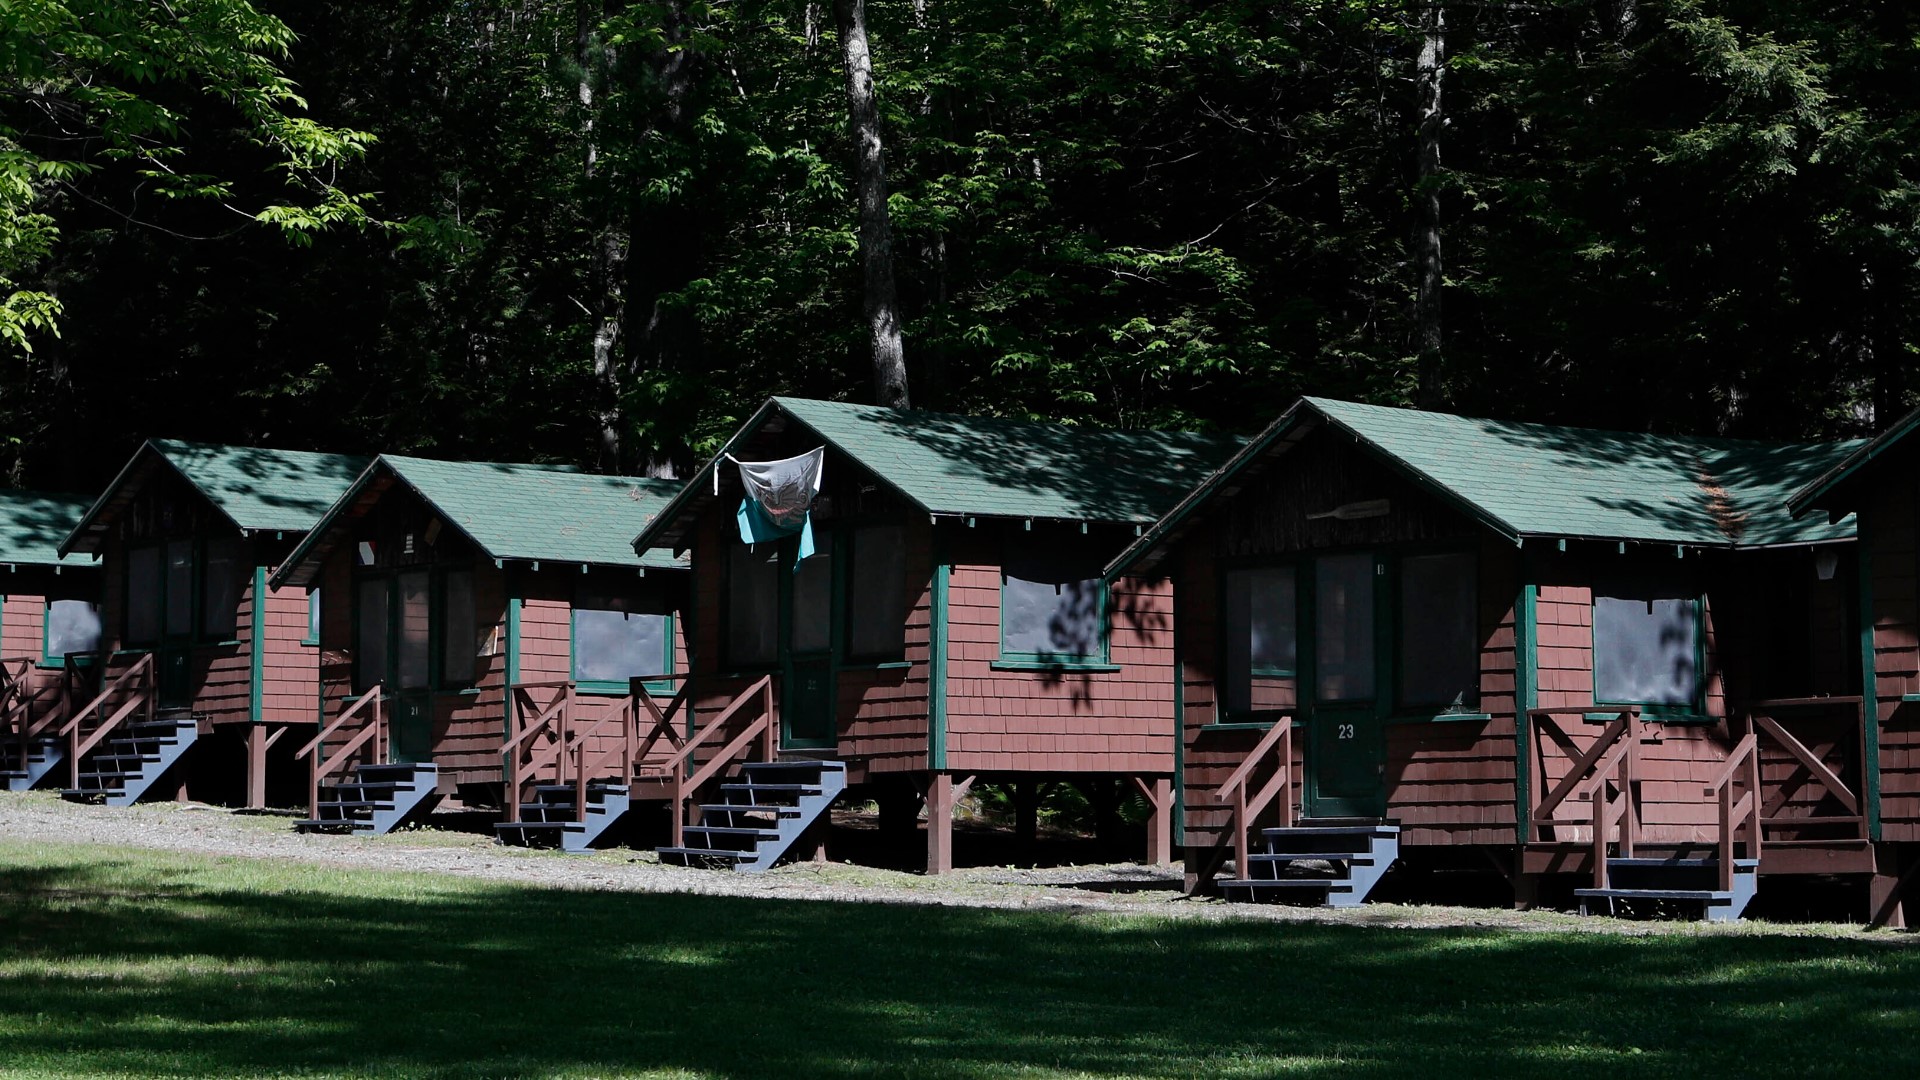 Four Maine summer camps were able to prevent COVID-19 outbreaks